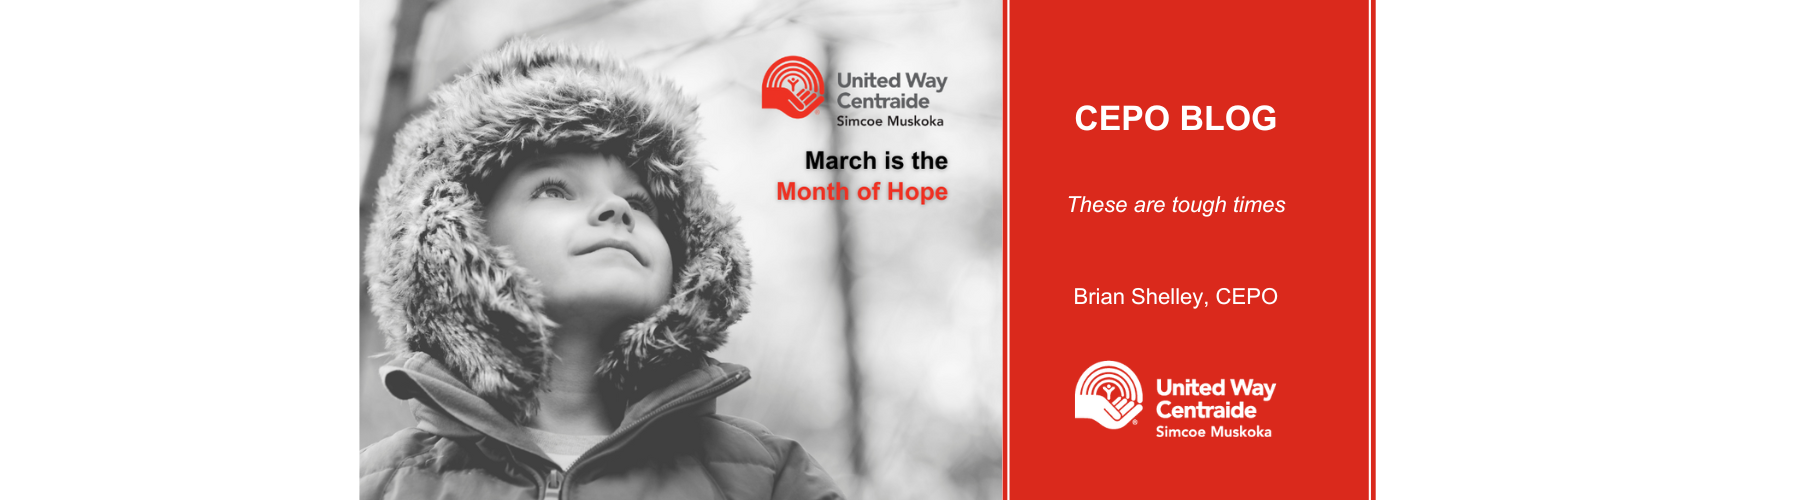 CEPO blog: March is the Month of Hope